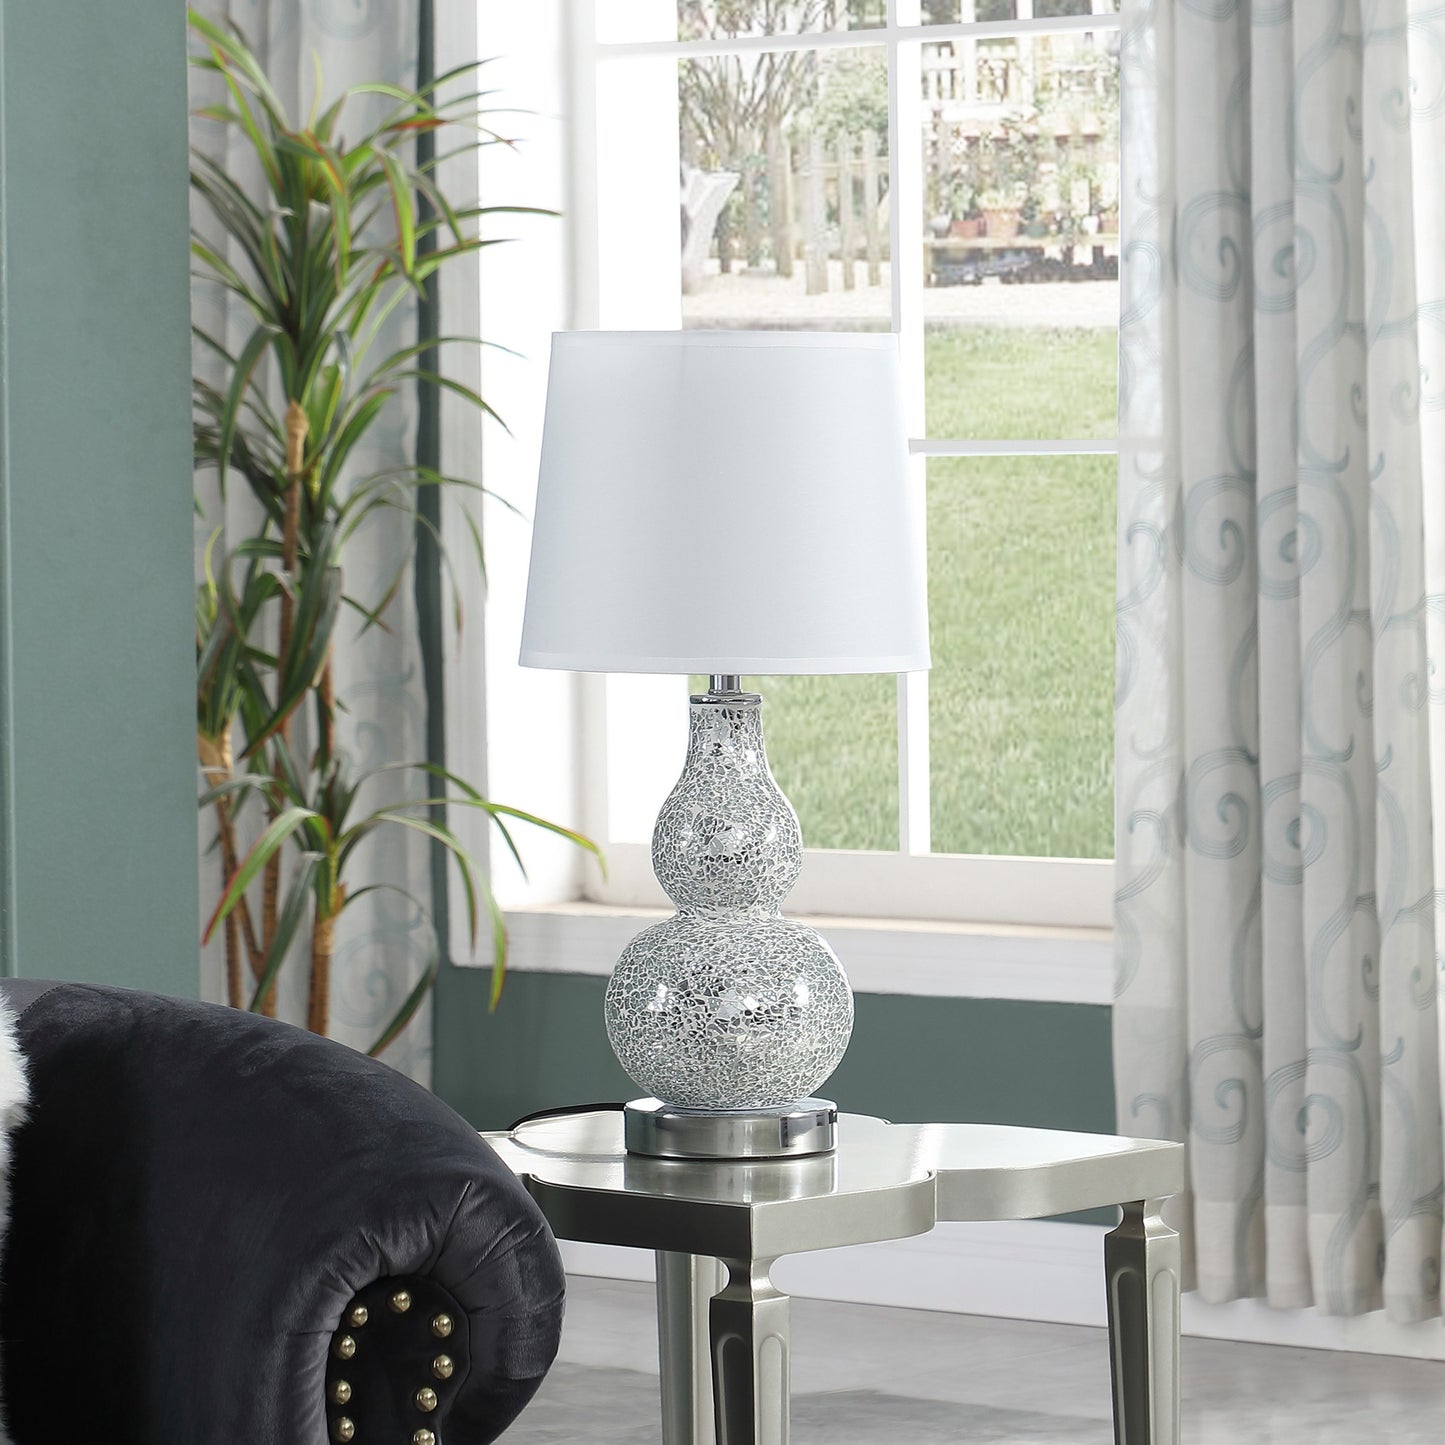 20" White Table Lamp With White Globe Shade